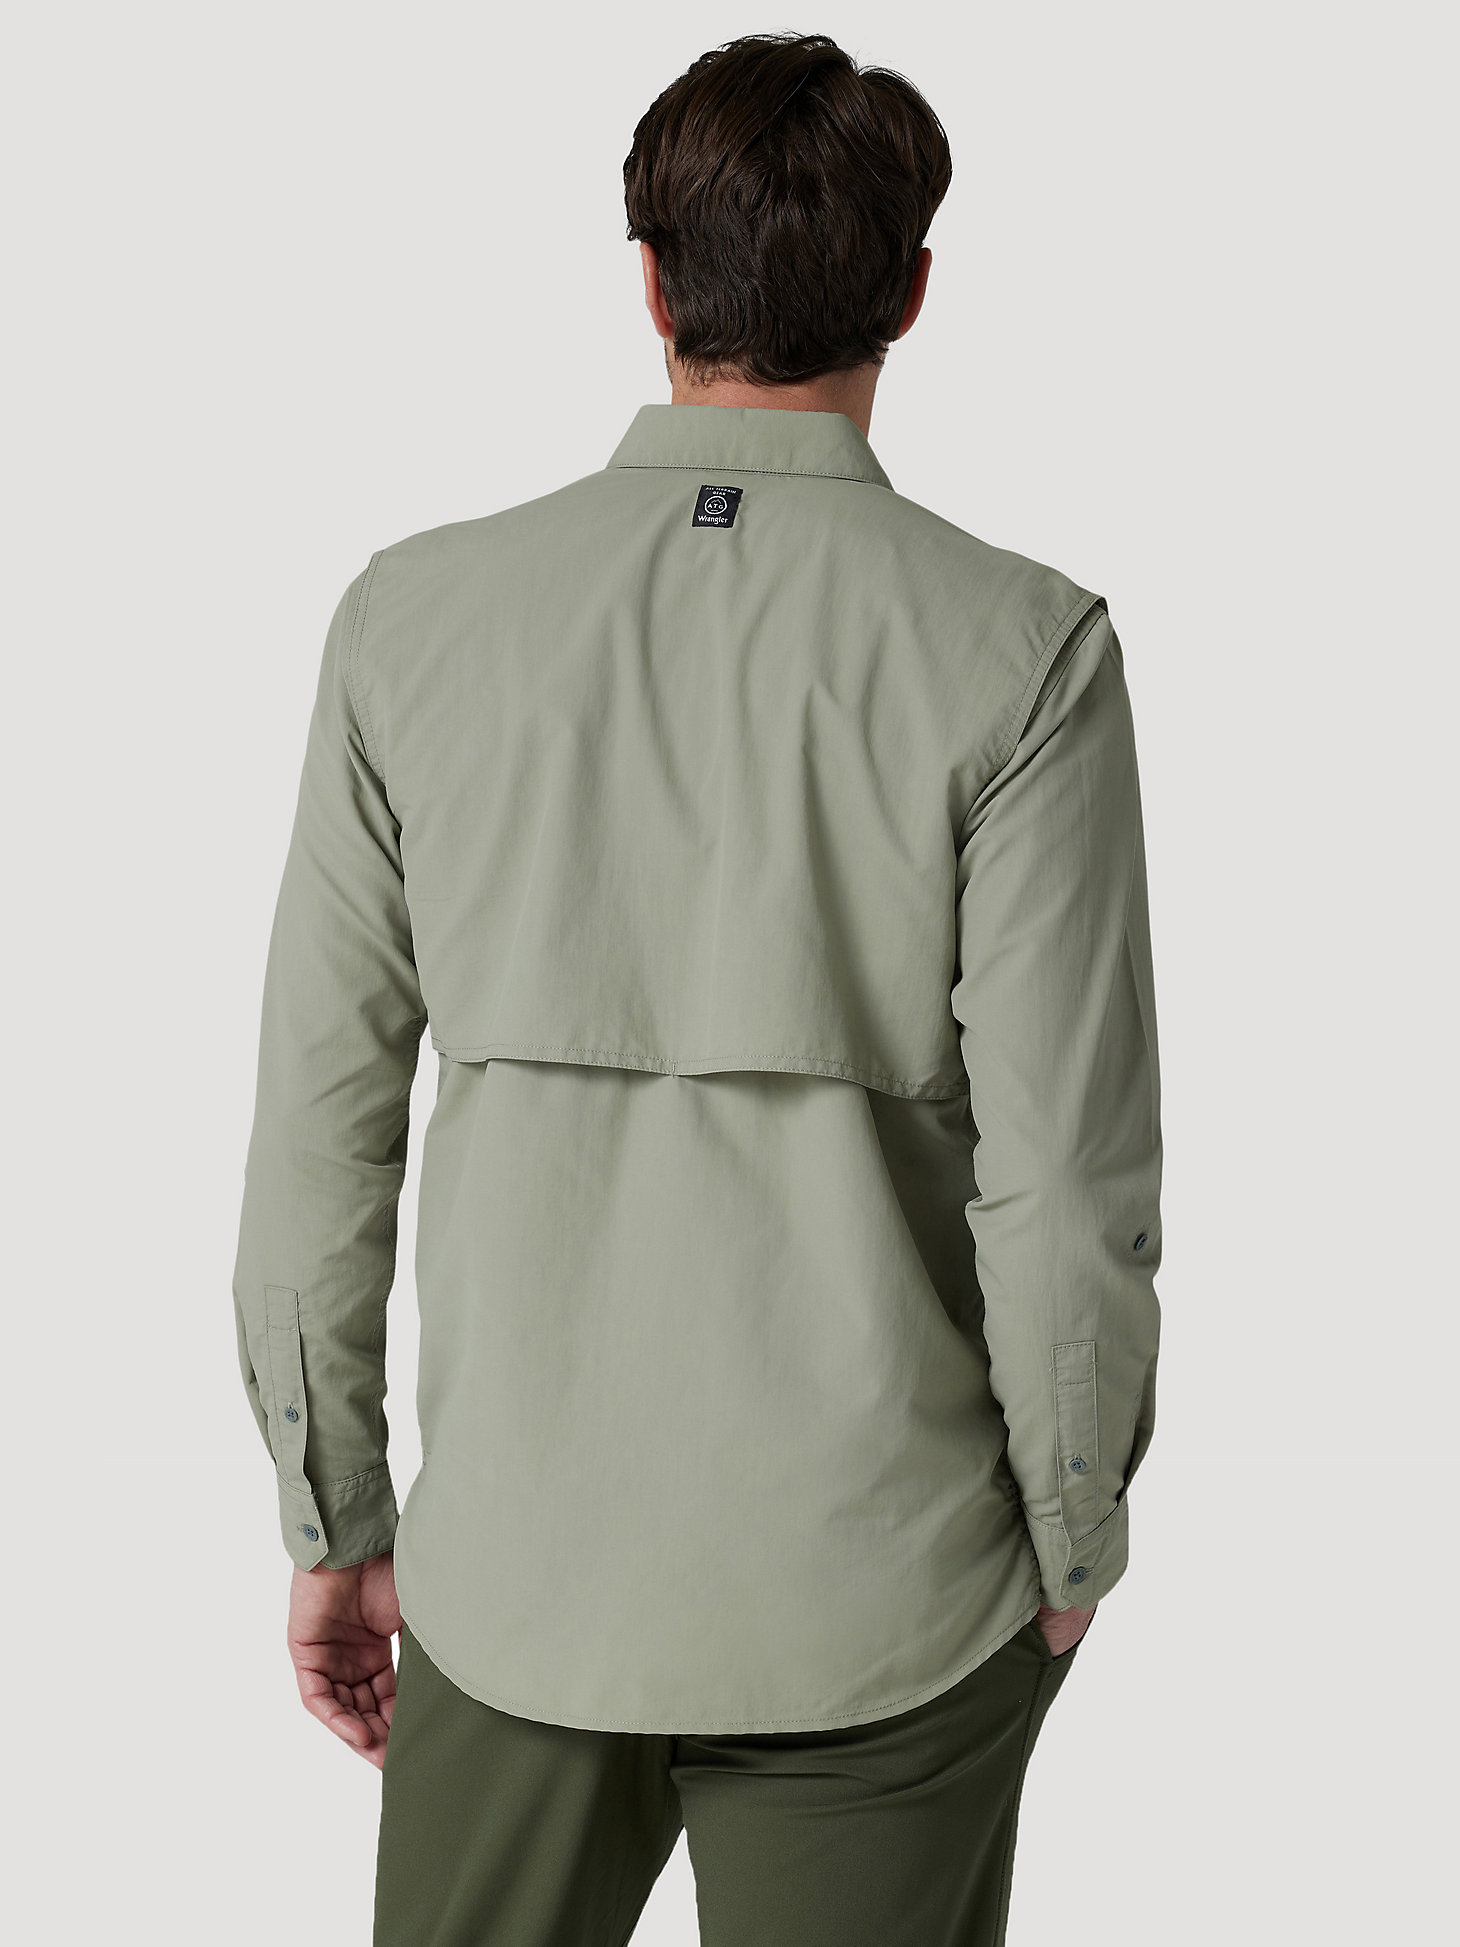 ATG By Wrangler™ Men's Angler Long Sleeve Shirt in Dried Sage alternative view 1